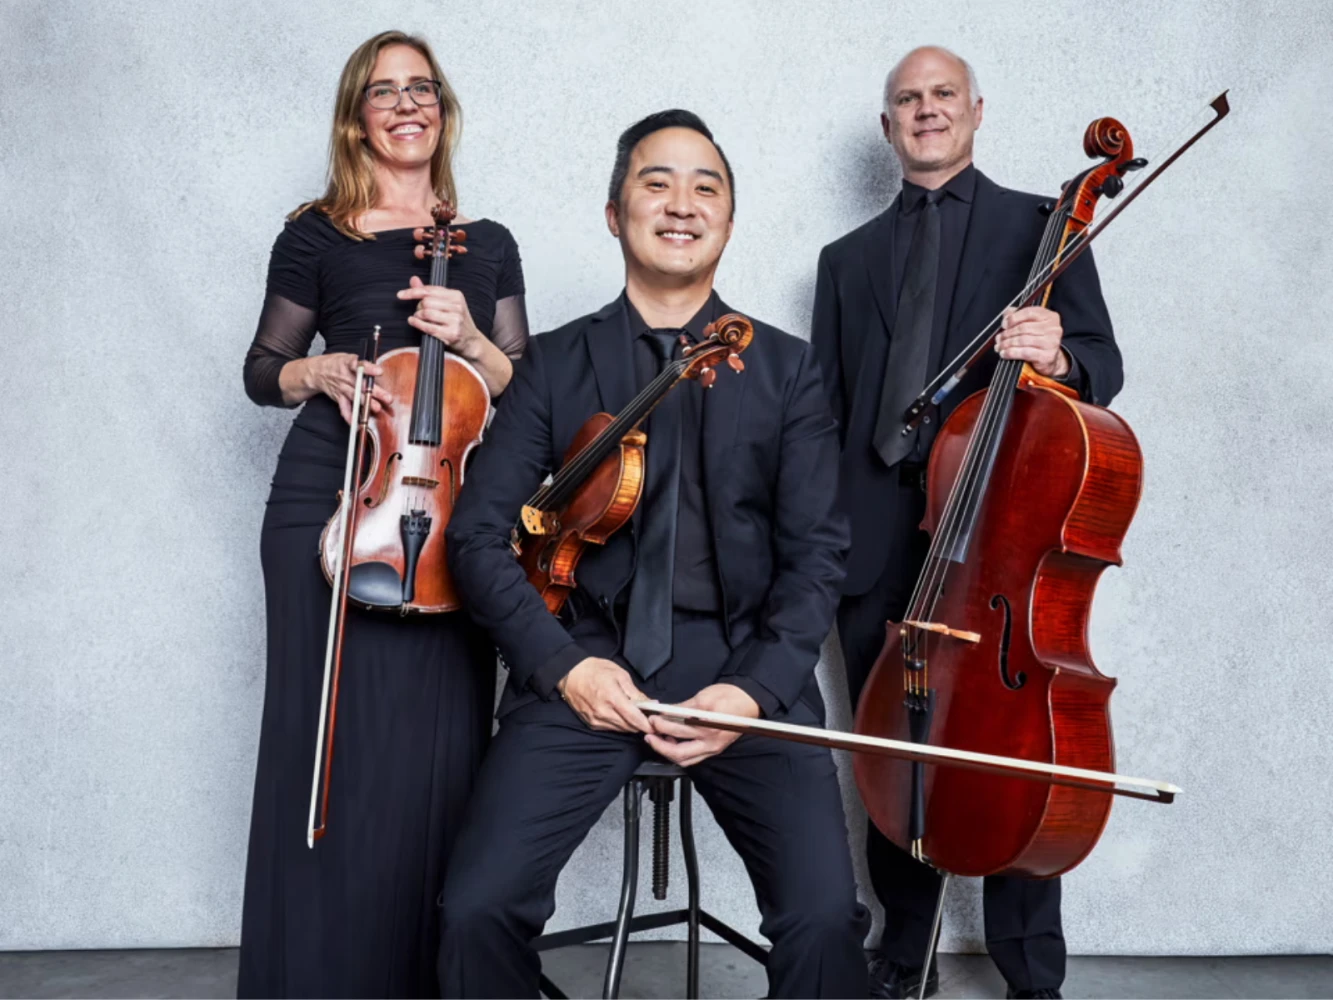 LA Phil's Chamber Music and Wine: May 7 Beethoven and Schumann: What to expect - 2